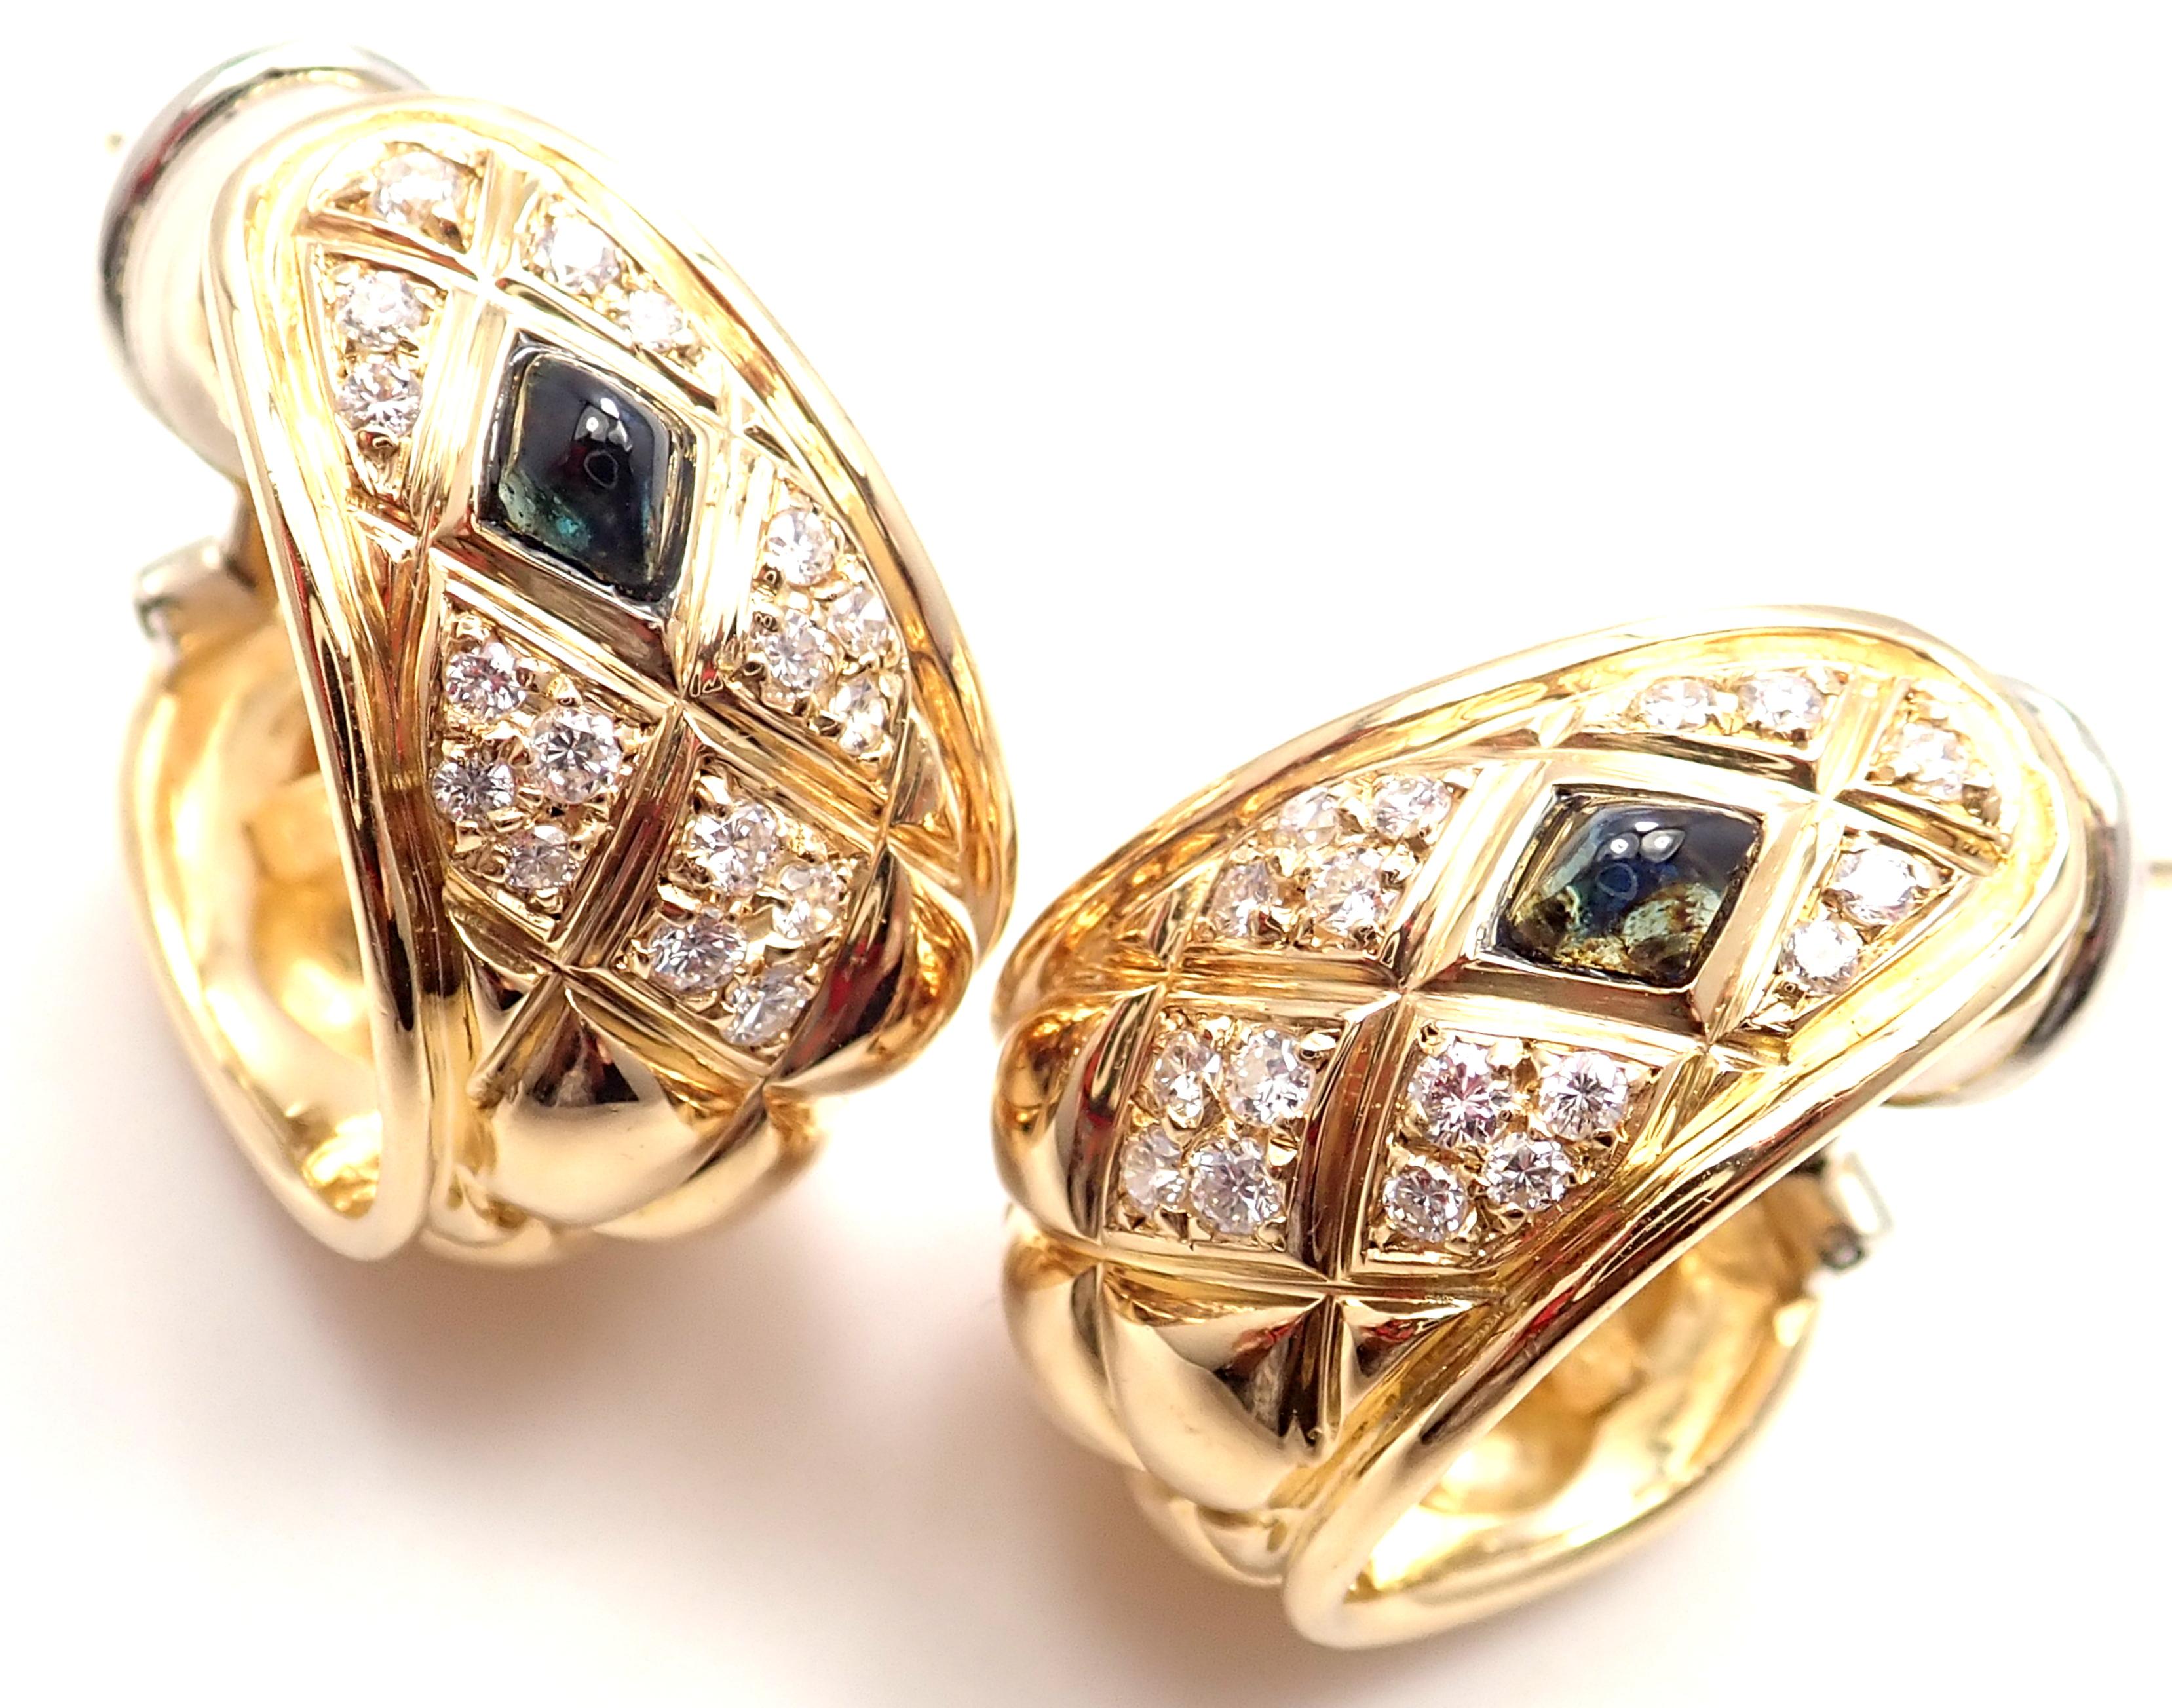 18k Yellow Gold Diamond & Sapphire Quilted Hoop Earrings by Chaumet Paris.
With 34 round brilliant cut diamonds SI1 clarity, G color total weight approx. .75ct
2 cabochon sapphires total weight approx. .50ct
These earrings are made for pierced